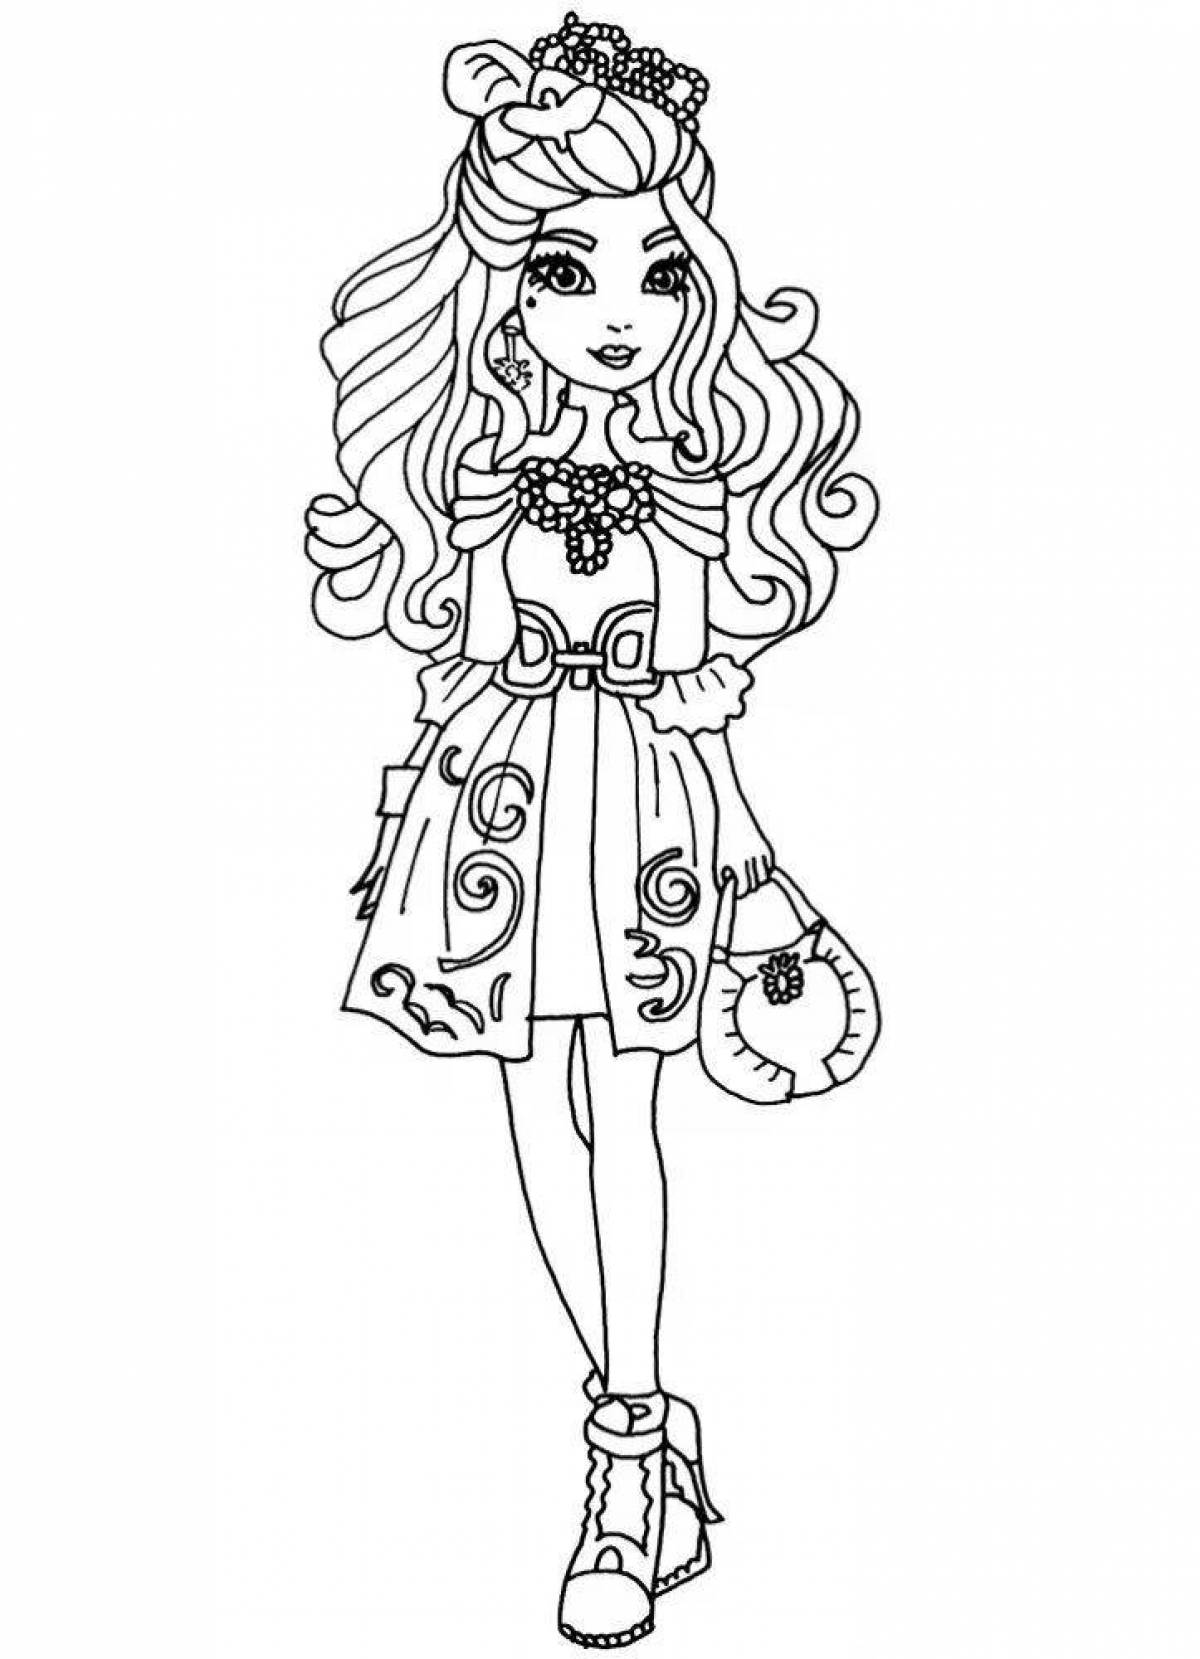 Coloring page magic poppy doll